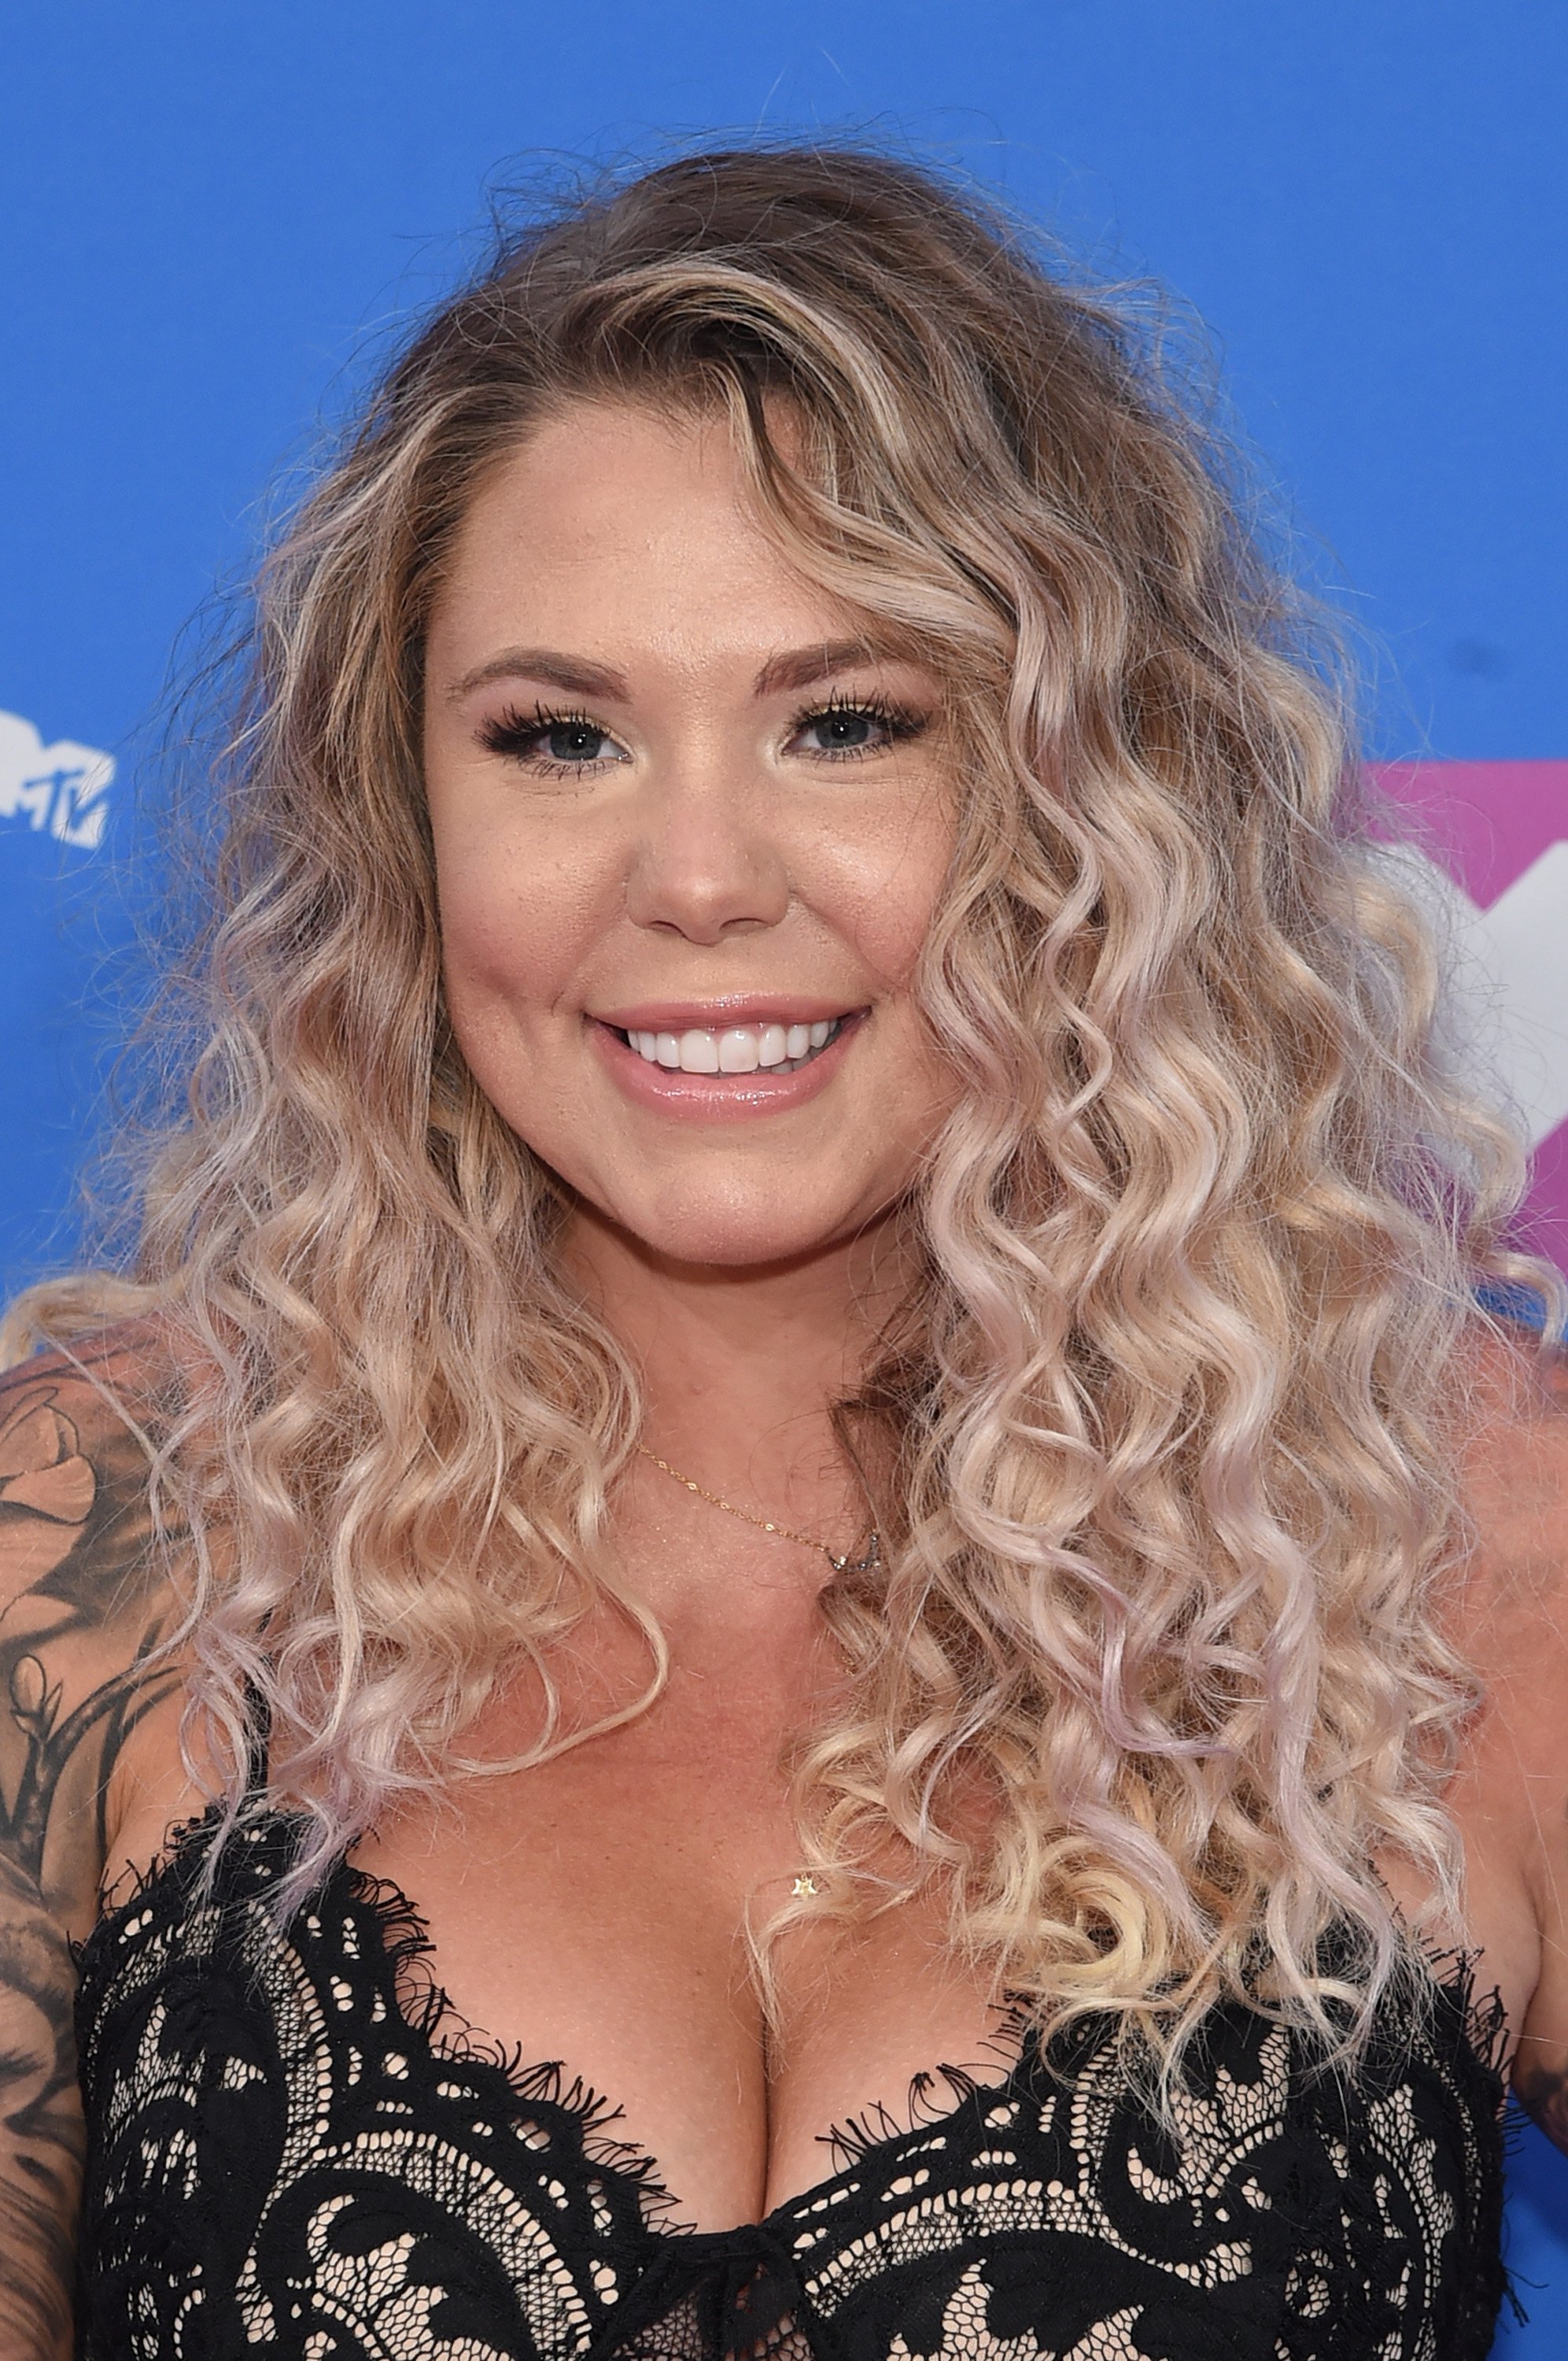 Kailyn Lowry attends the 2018 MTV Video Music Awards